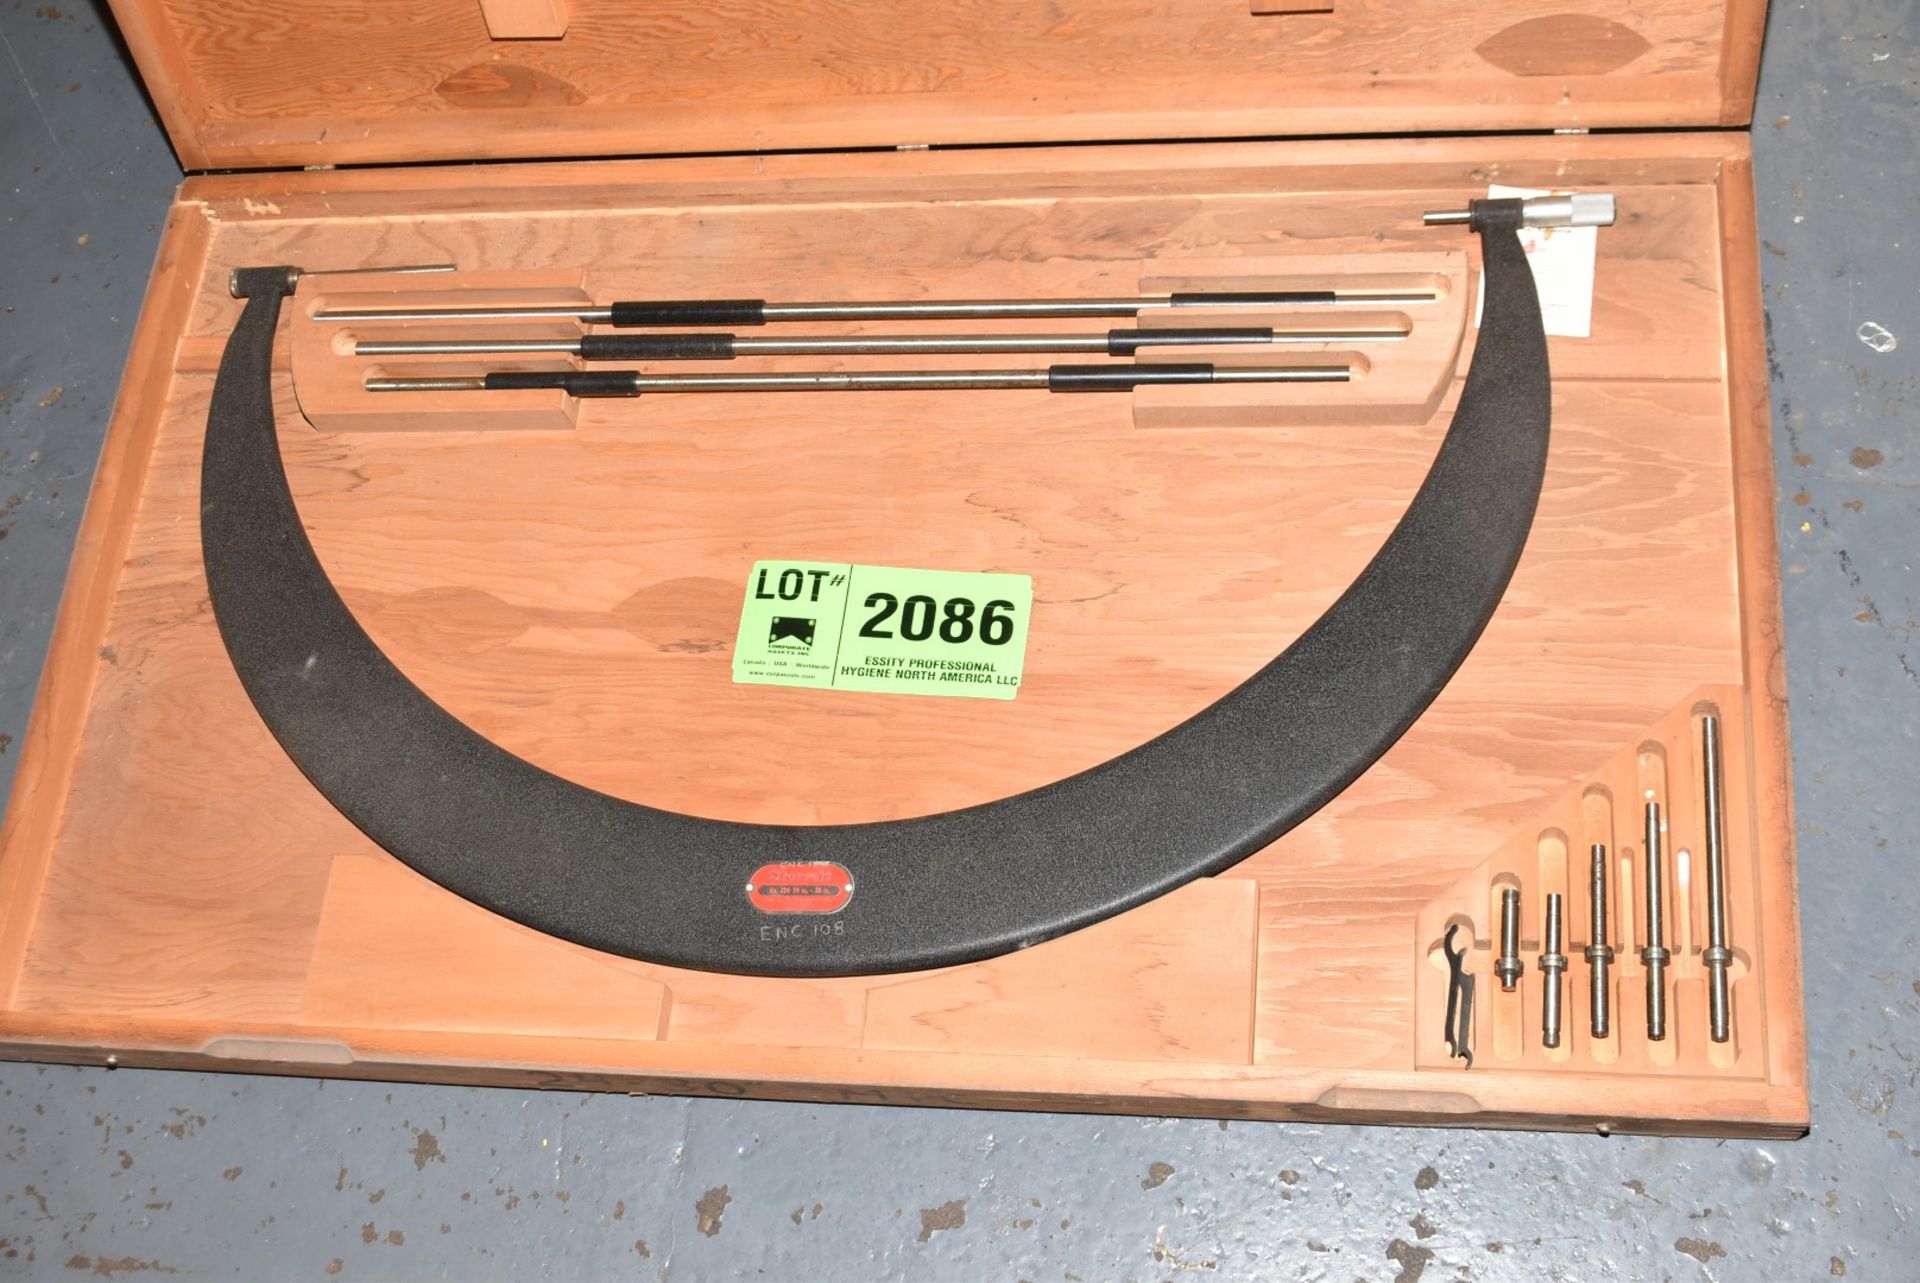 STARRETT 24" TO 30" OUTSIDE MICROMETER [RIGGING FEES FOR LOT #2086 - $25 USD PLUS APPLICABLE TAXES] - Image 3 of 3